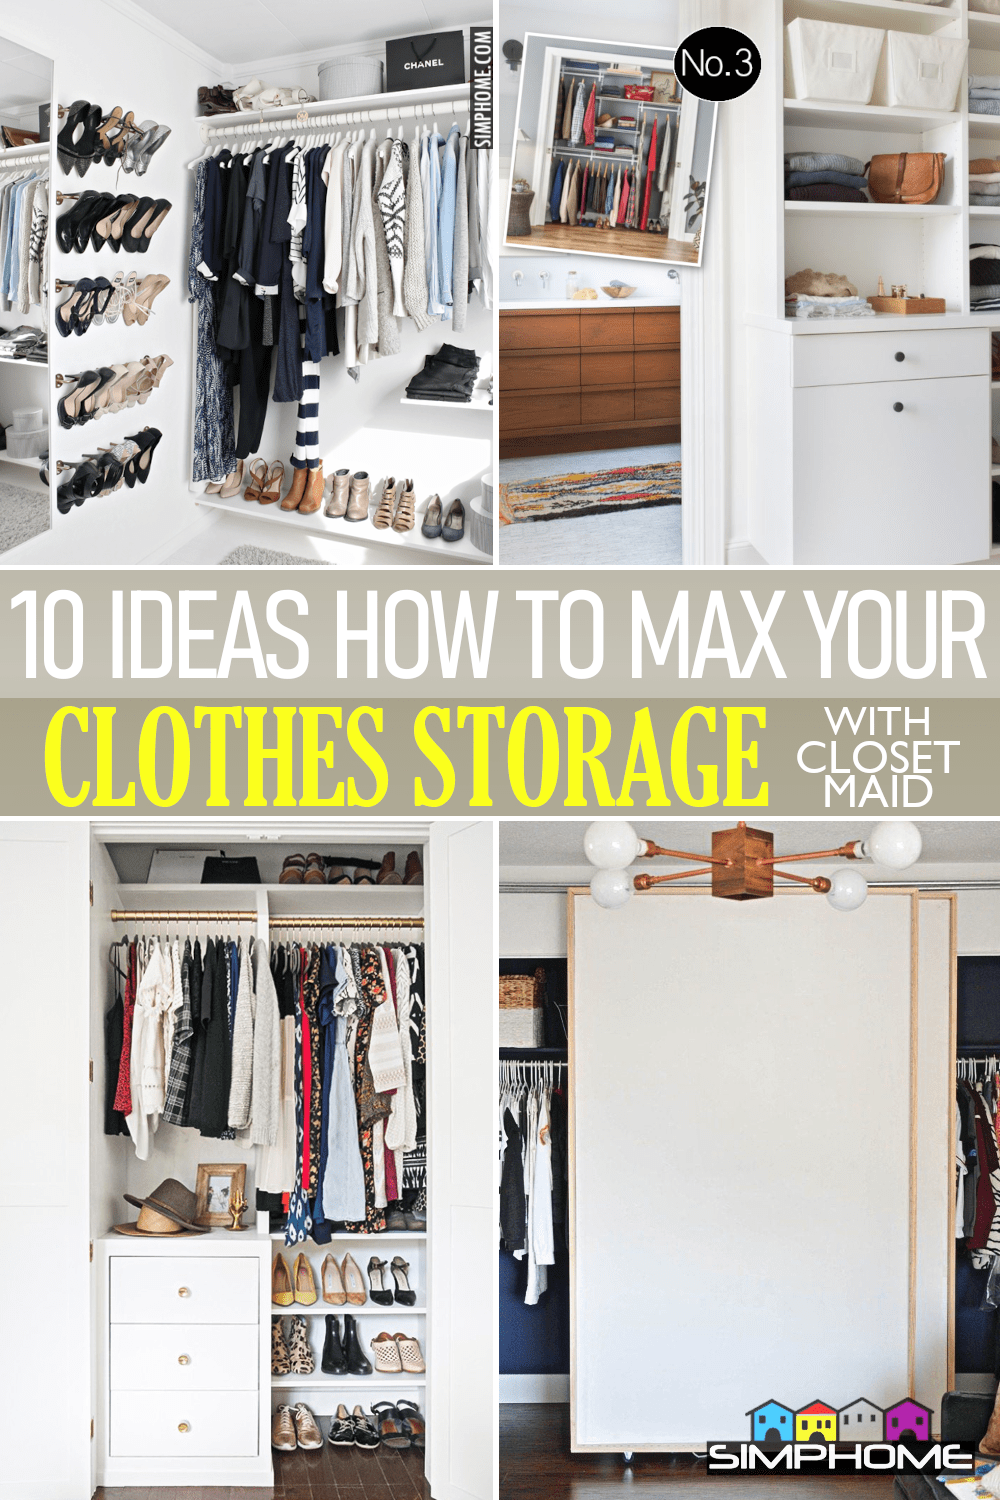 10 Ideas How to Max Your Clothes Storage with ClosetMaids via Simphome.comFeatured